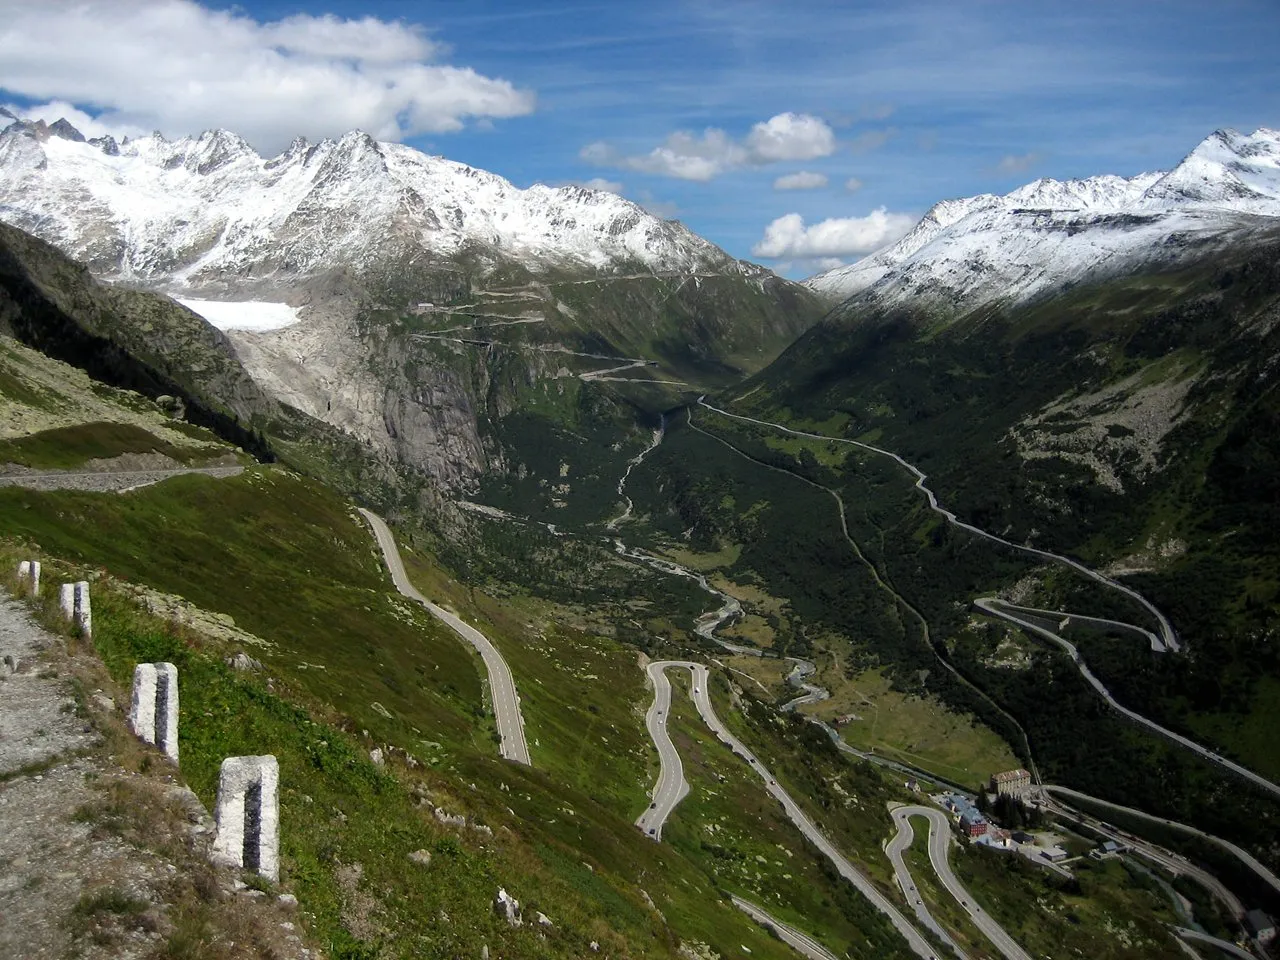 Photo showing: Furkapass and hairpins of the Furkapassroute in Switzerland as seen from Grimselpassroute